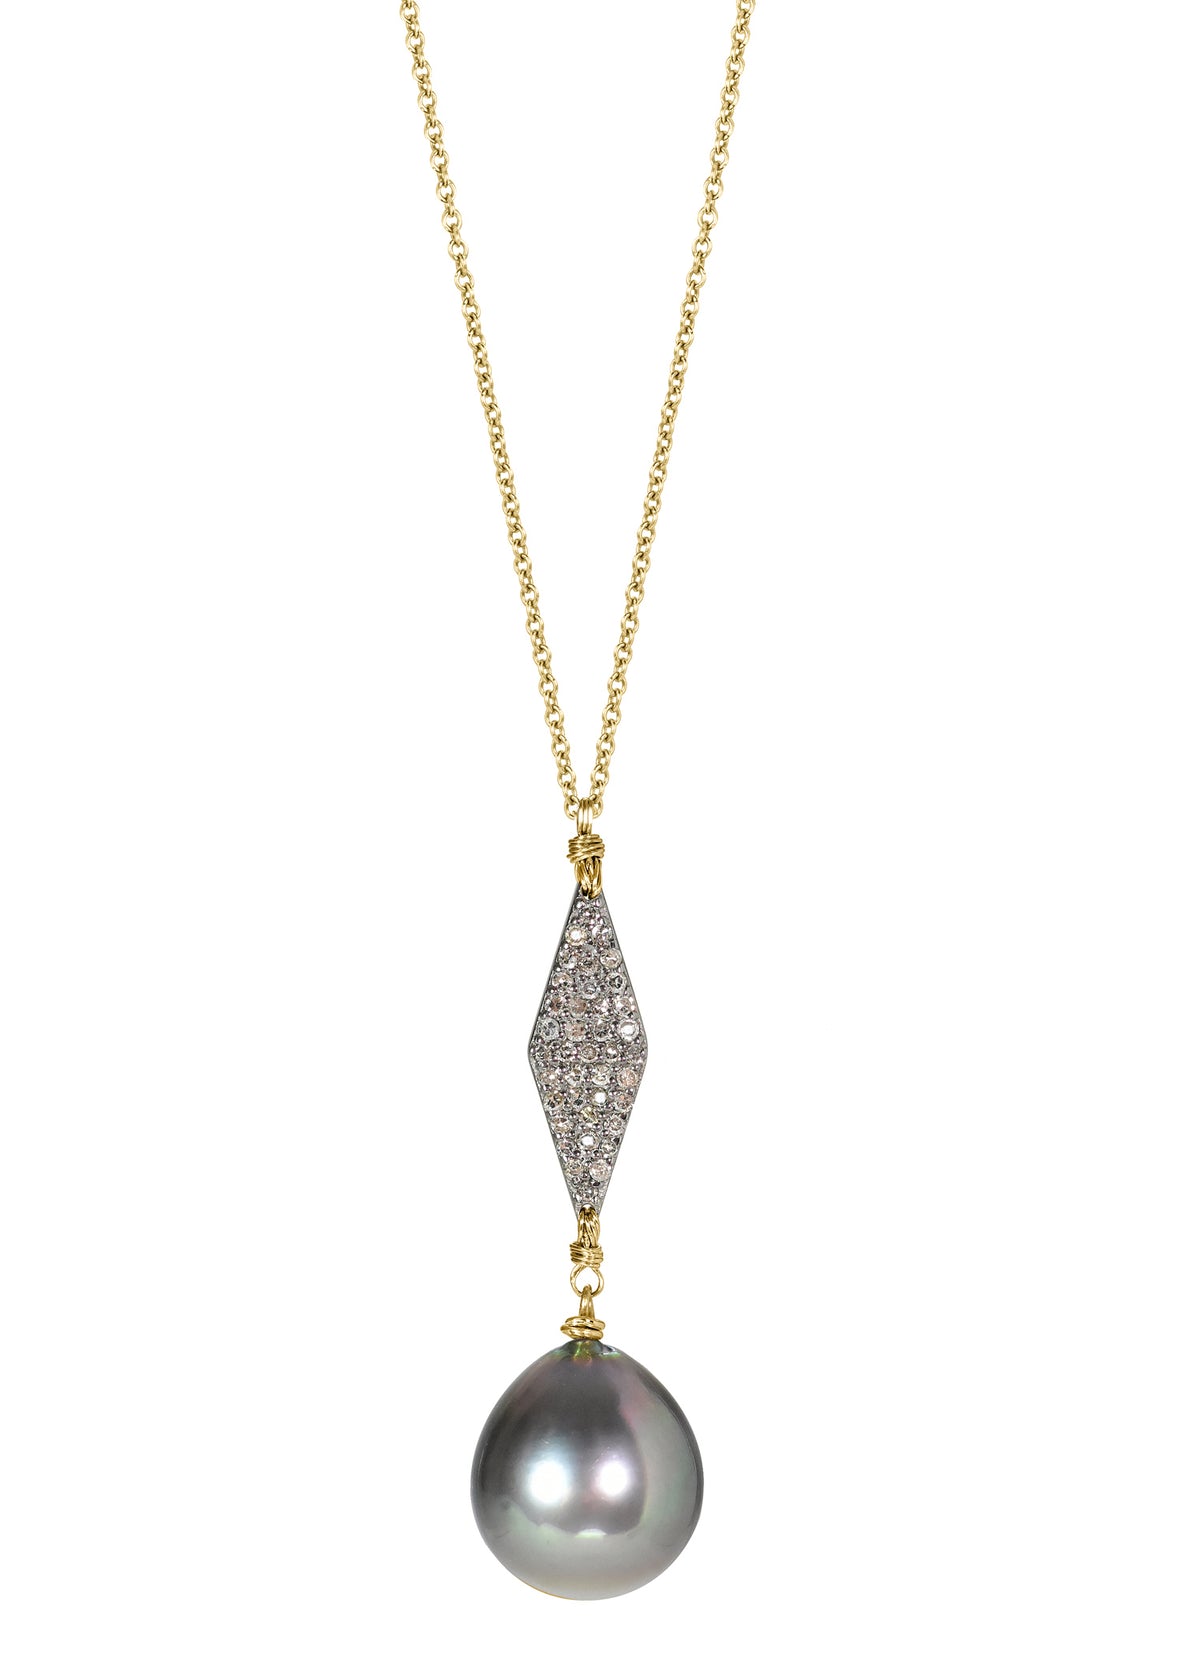 Diamond Tahitian pearl 14k gold Sterling silver Mixed metal Necklace measures 30&quot; in length Pendant measures 1-1/2&quot; in length and 1/2&quot; in width at the widest point Handmade in our Los Angeles studio